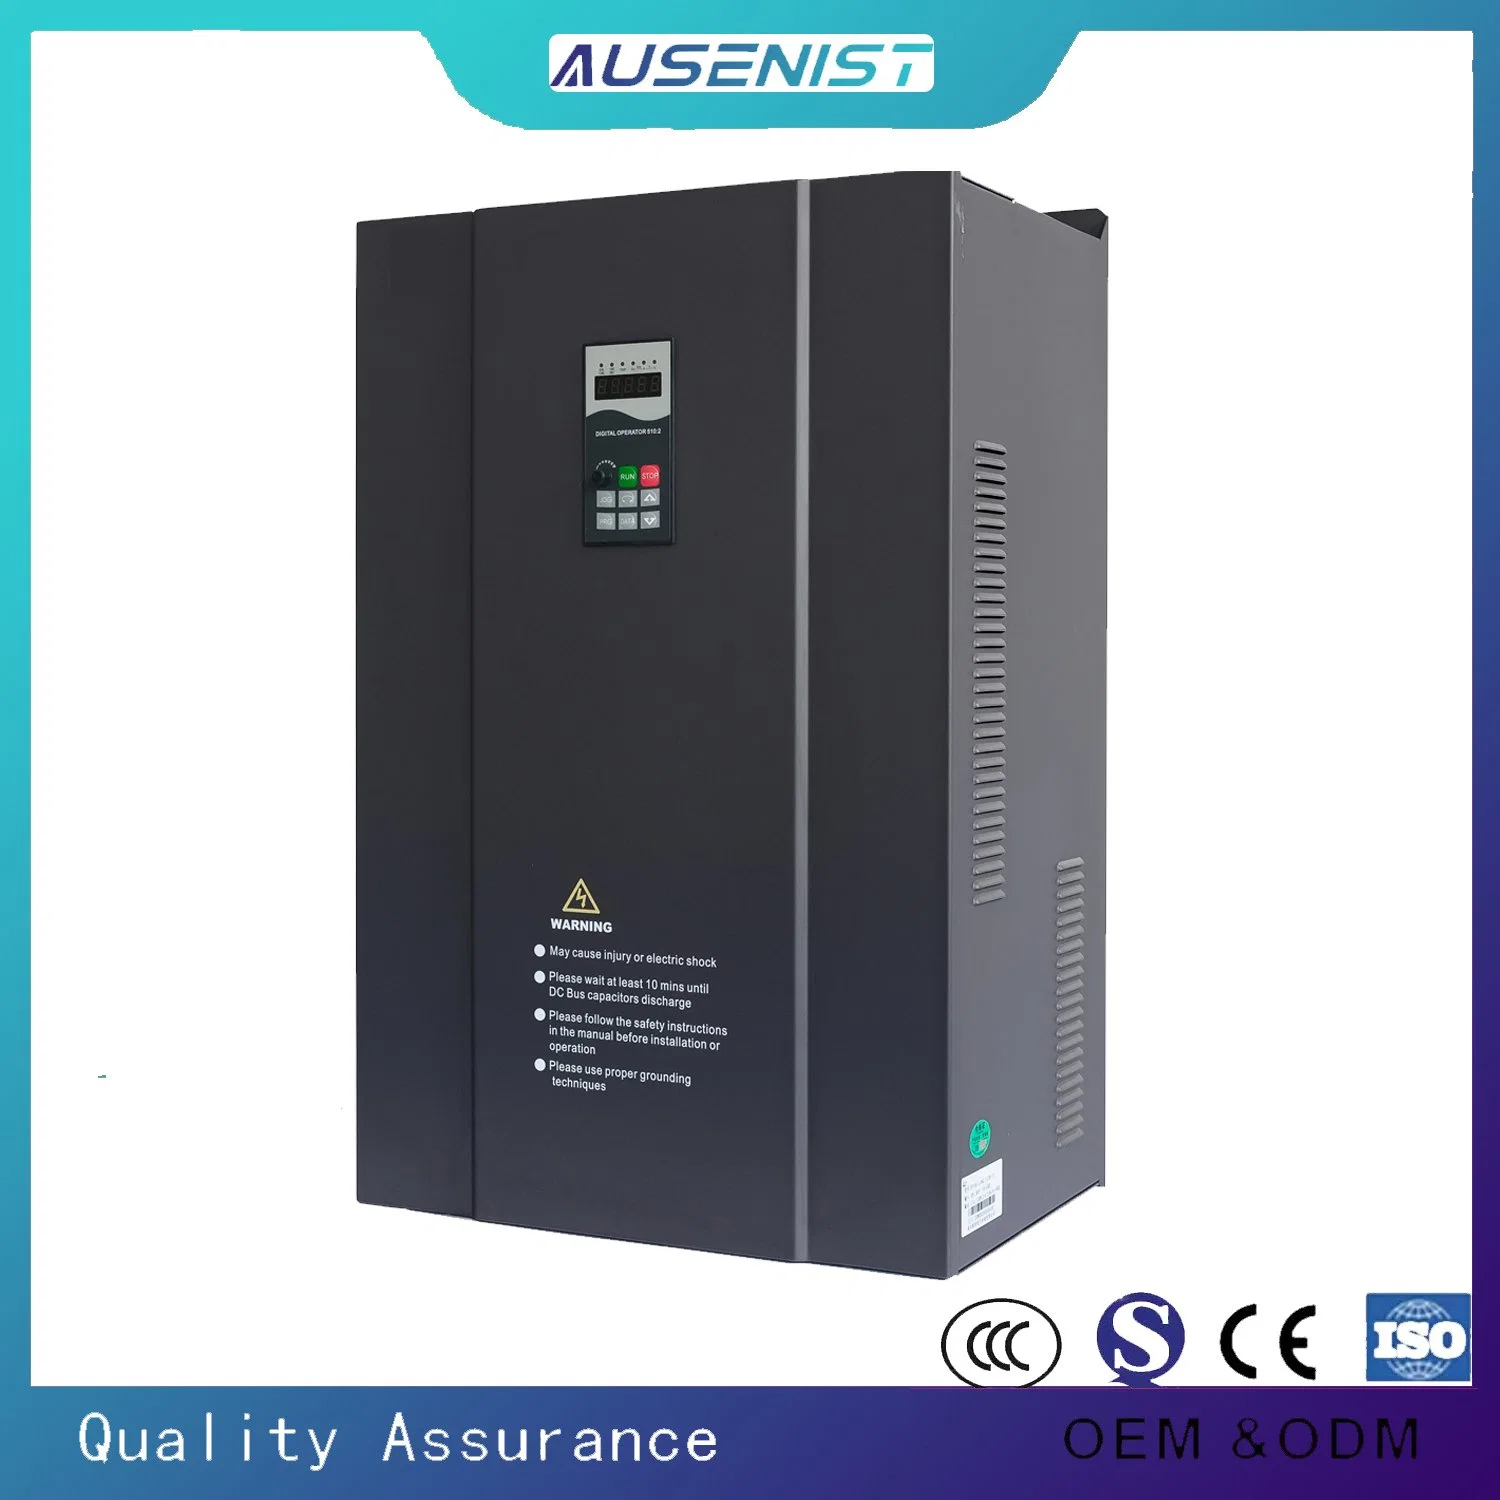 Ausenist Overseas Warehouse 5.5kw /7.5kw VFD 220V to 380V Spindle Inverters VFD AC Drive Frequency Converter Factory Direct Sales Inverter